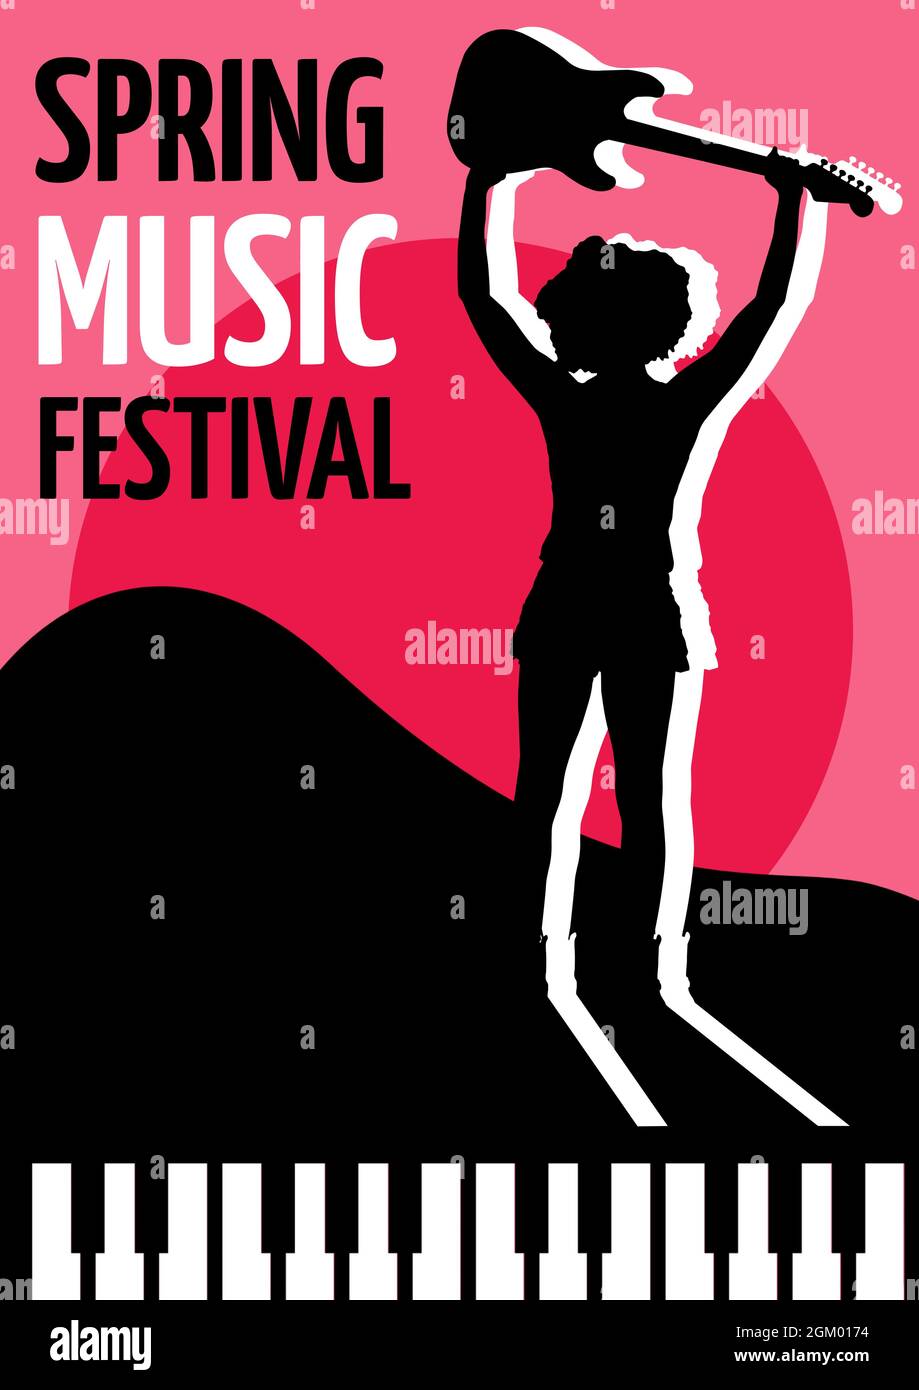 Spring music festival text with female musician holding a guitar icon against pink background Stock Photo